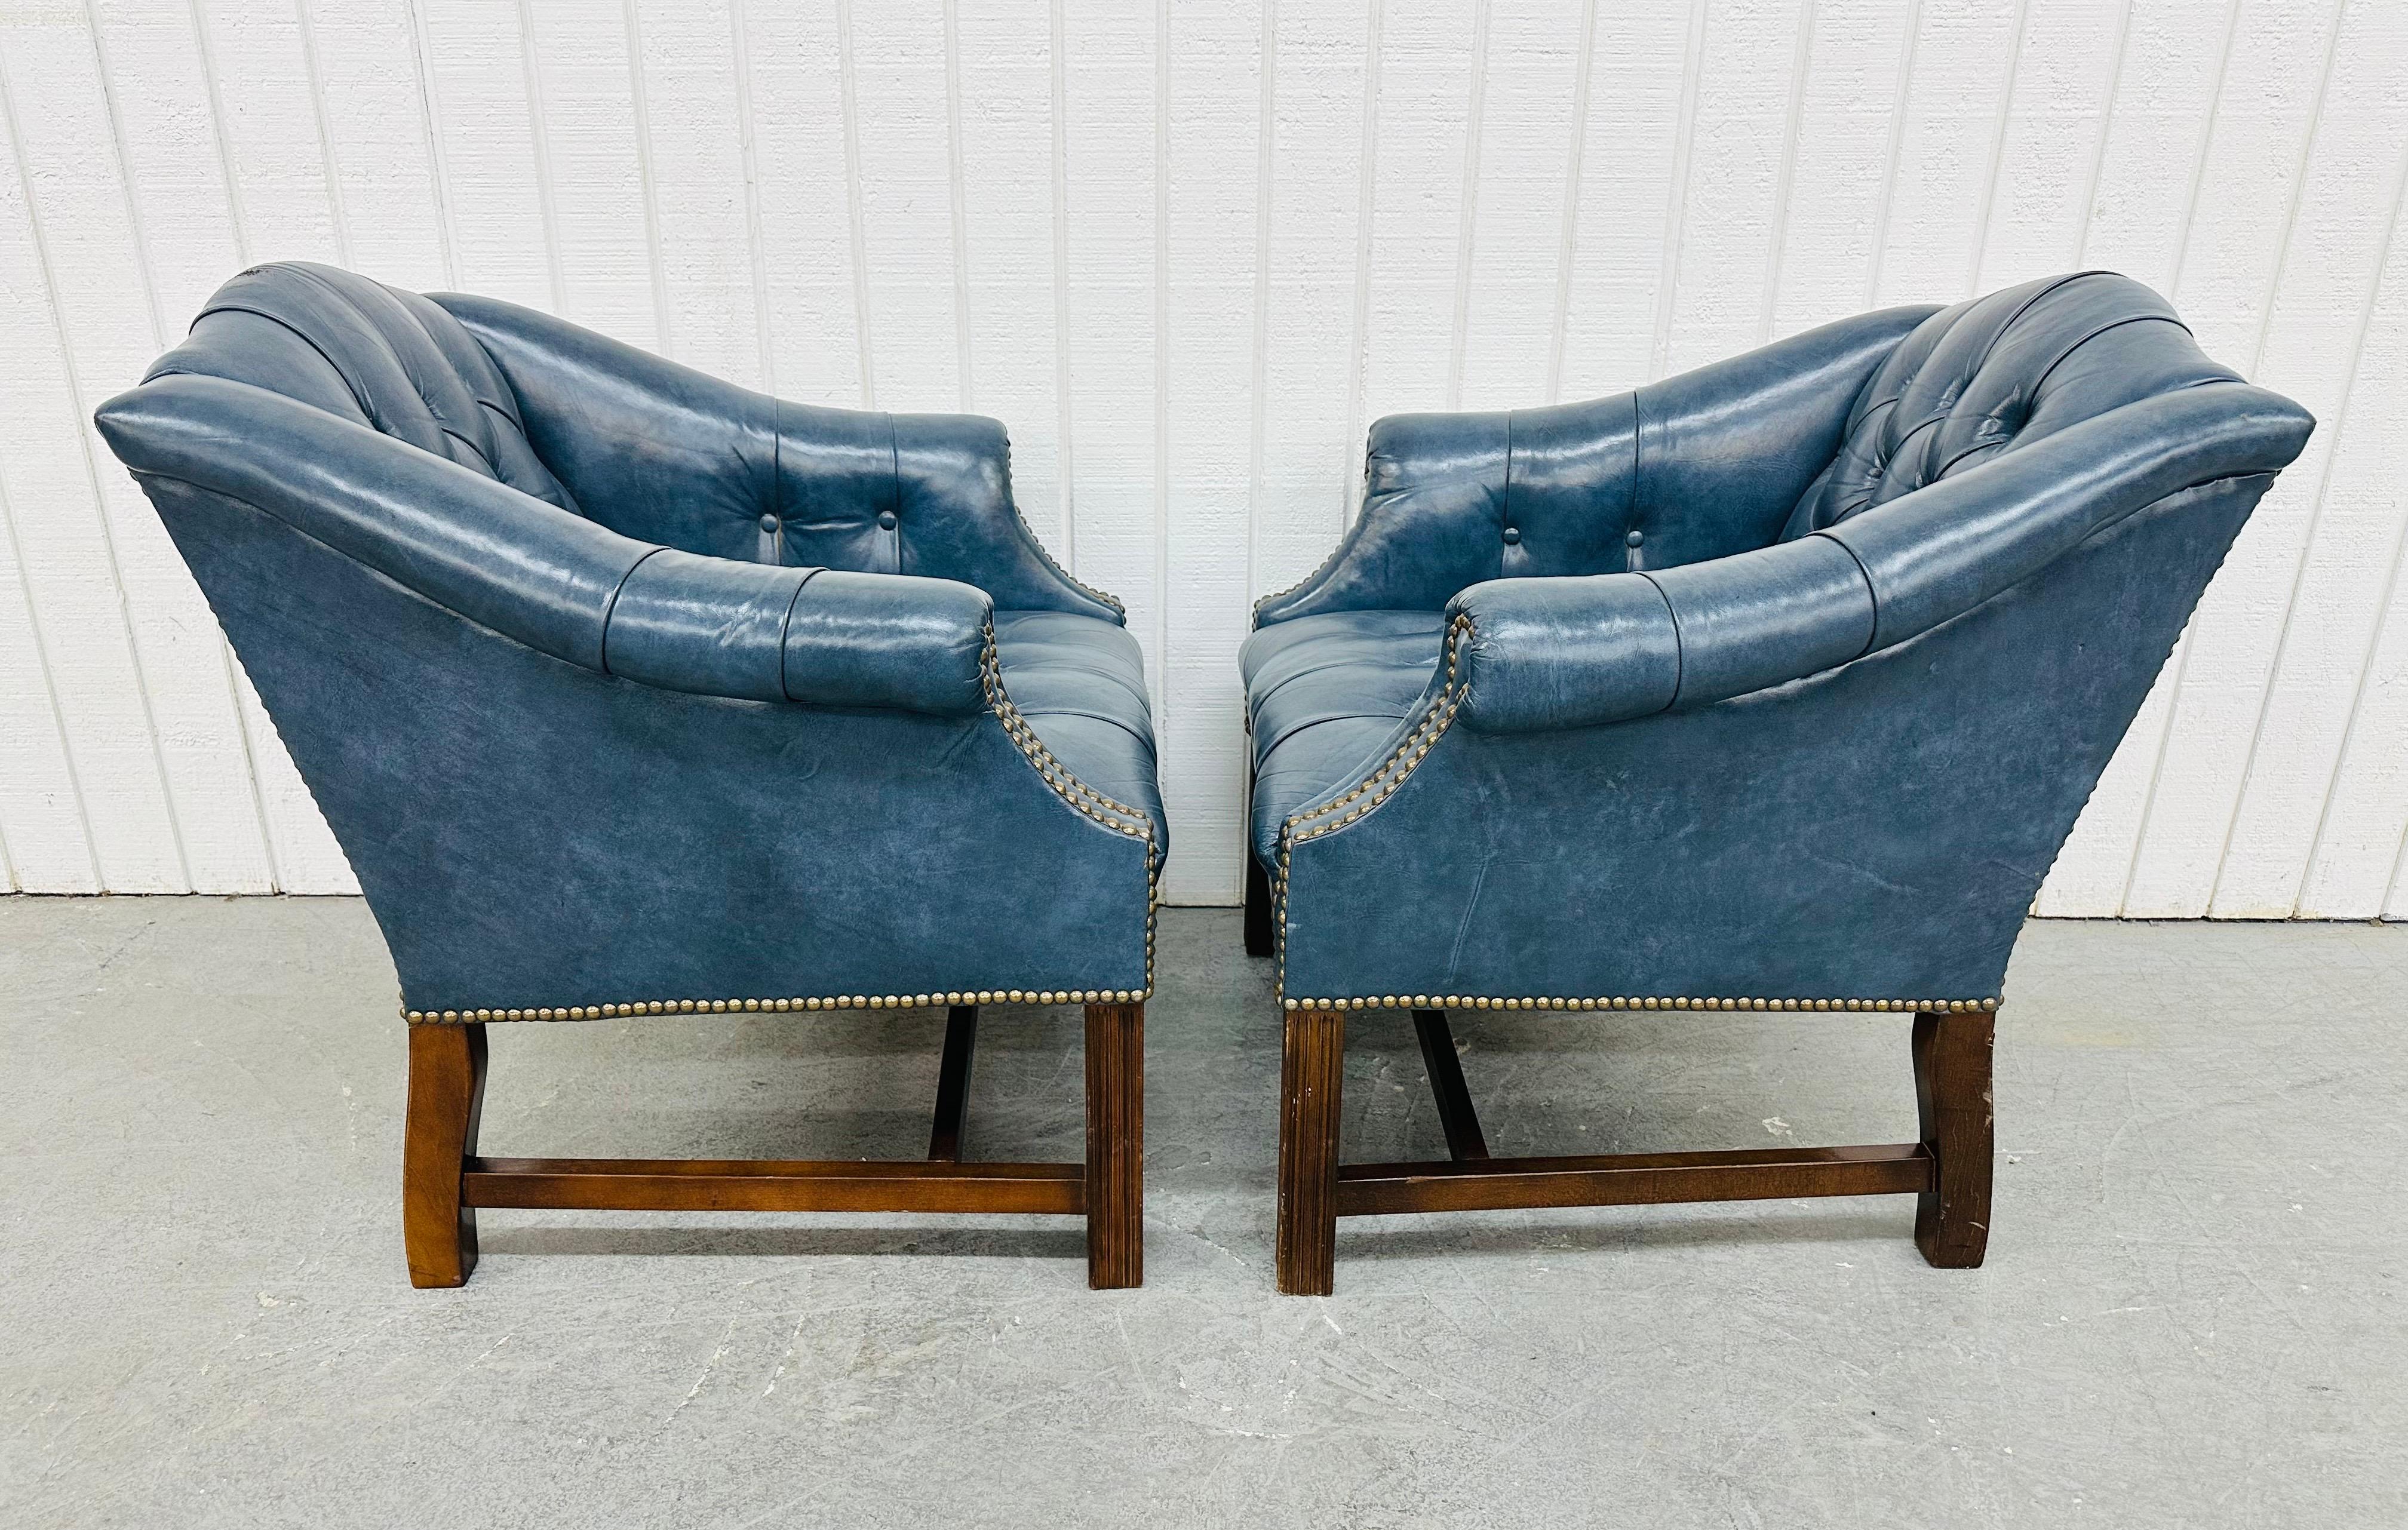 Leather Vintage Blue Chesterfield Arm Chairs - Set of 2